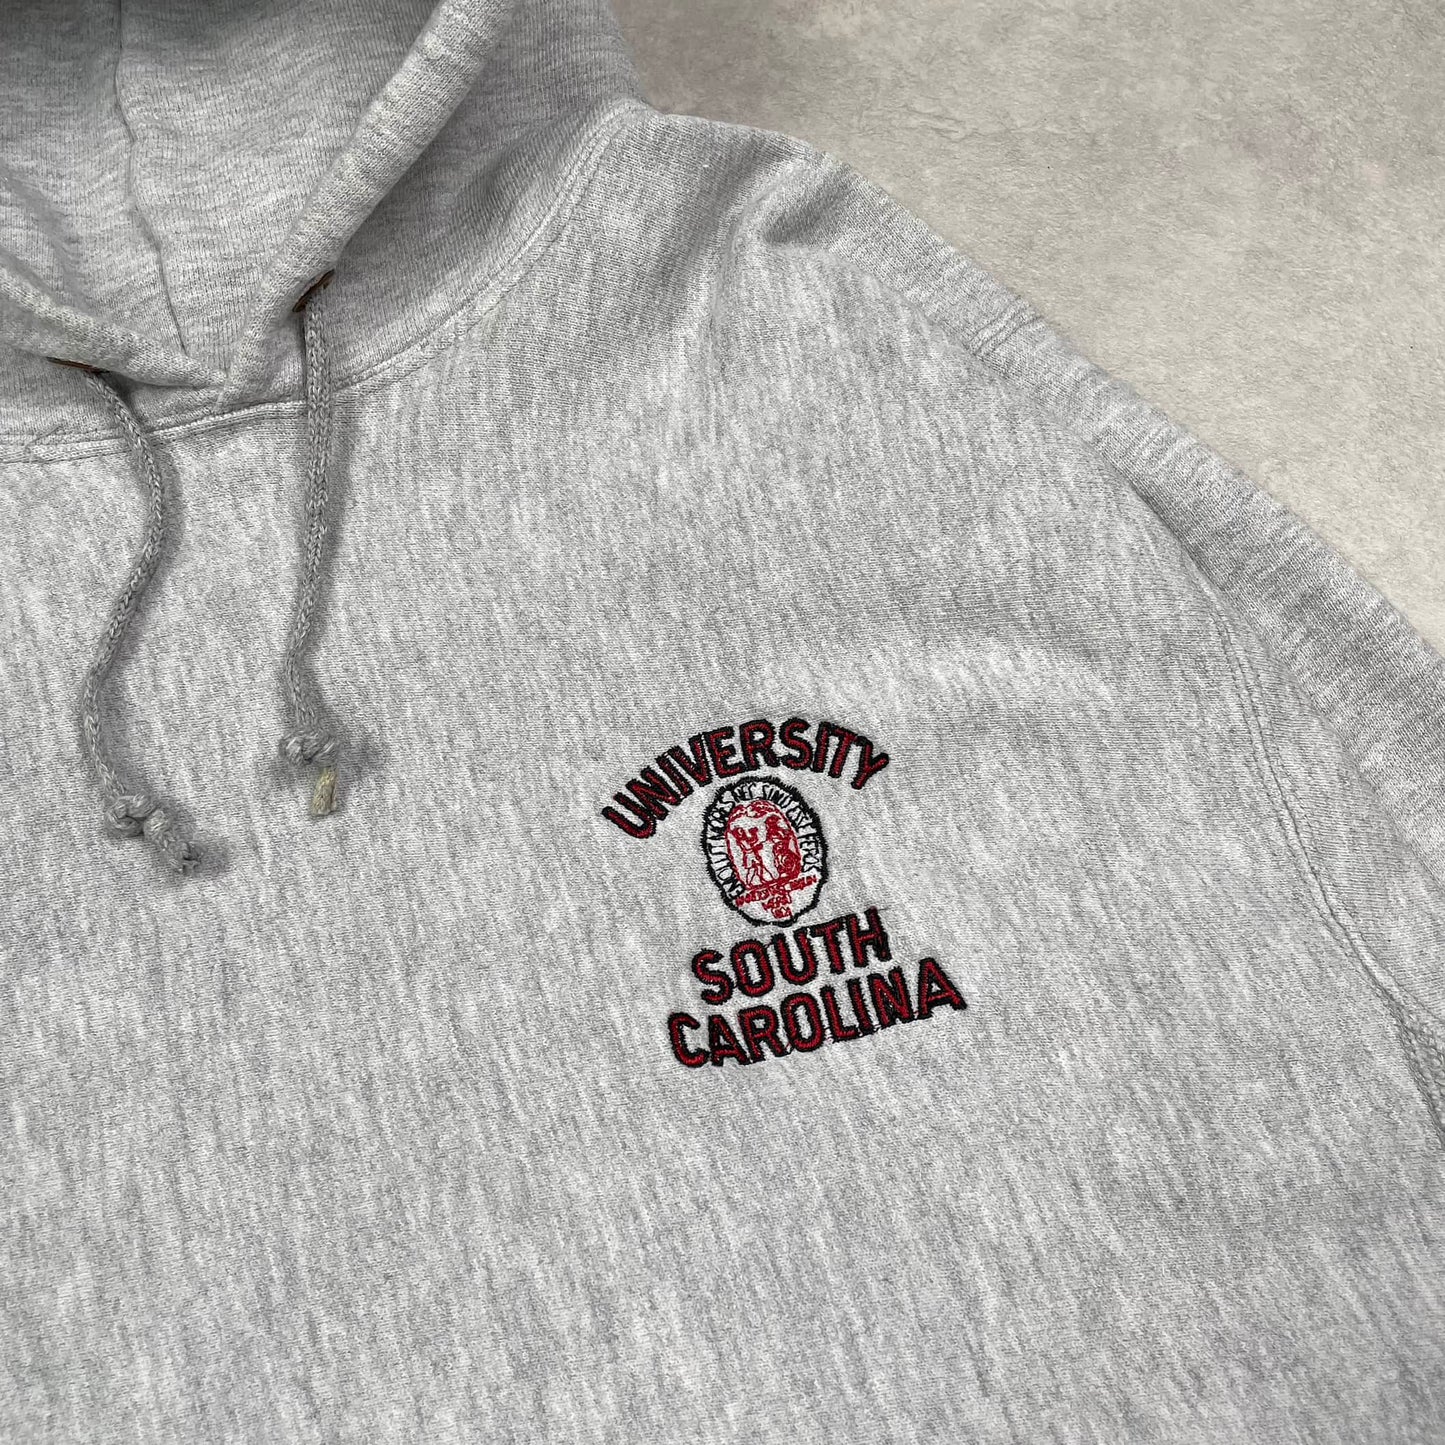 Vintage Hoodie Champion Reverse Weave University of South Carolina Made in USA 80’s